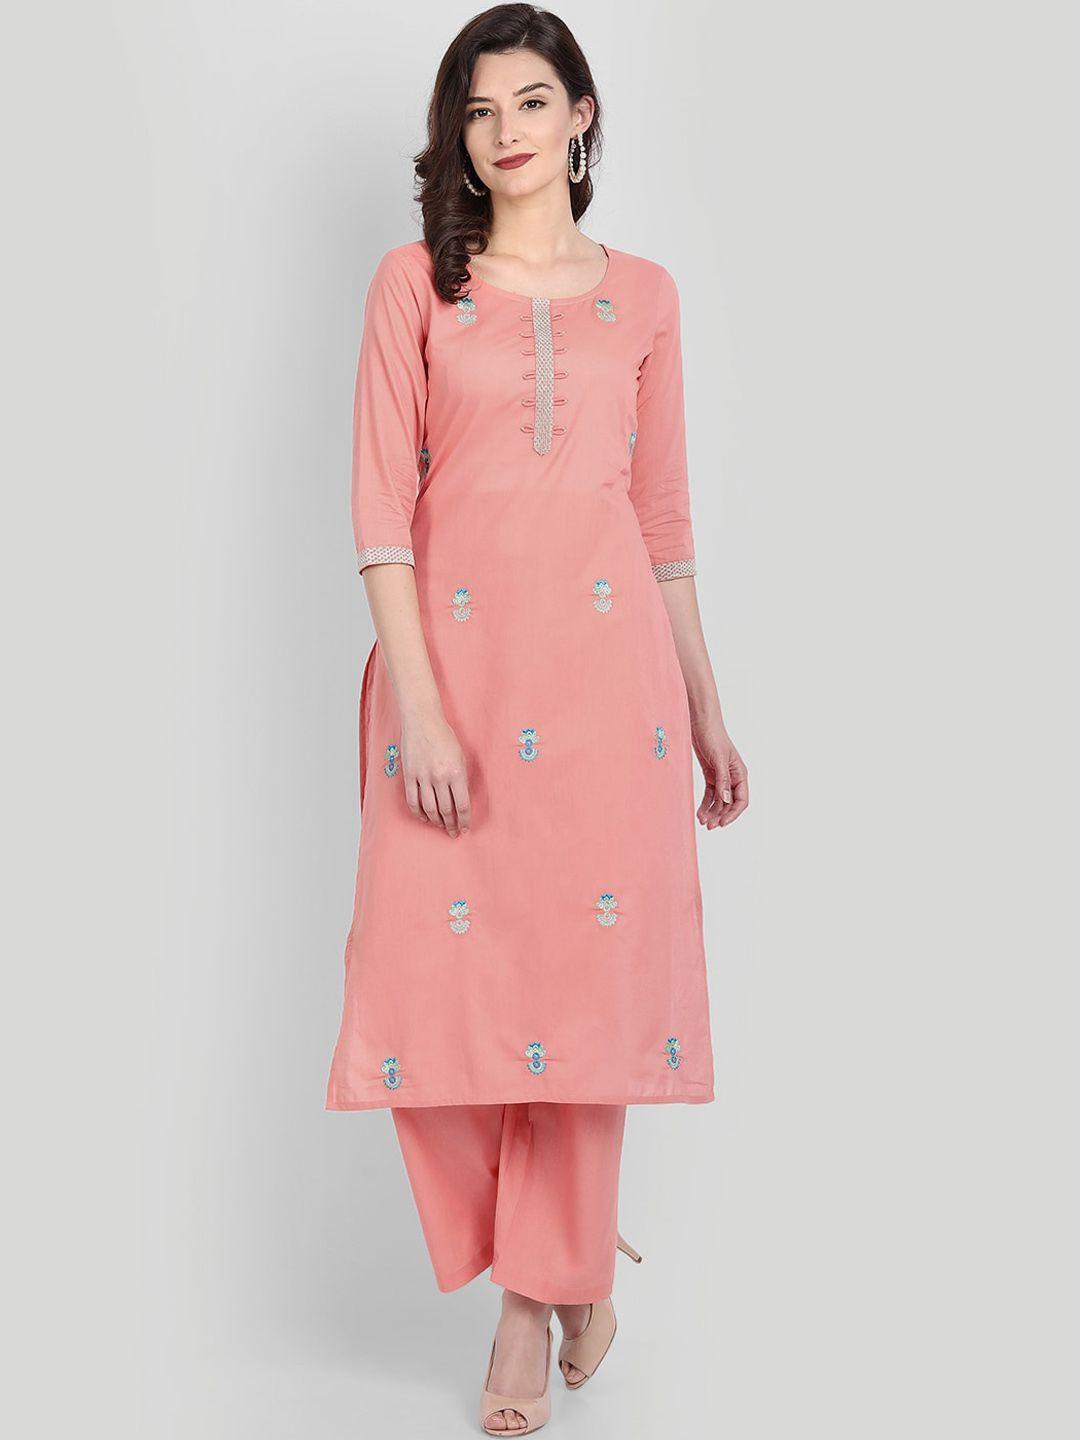 githaan women pink floral embroidered layered pure cotton kurti with trousers